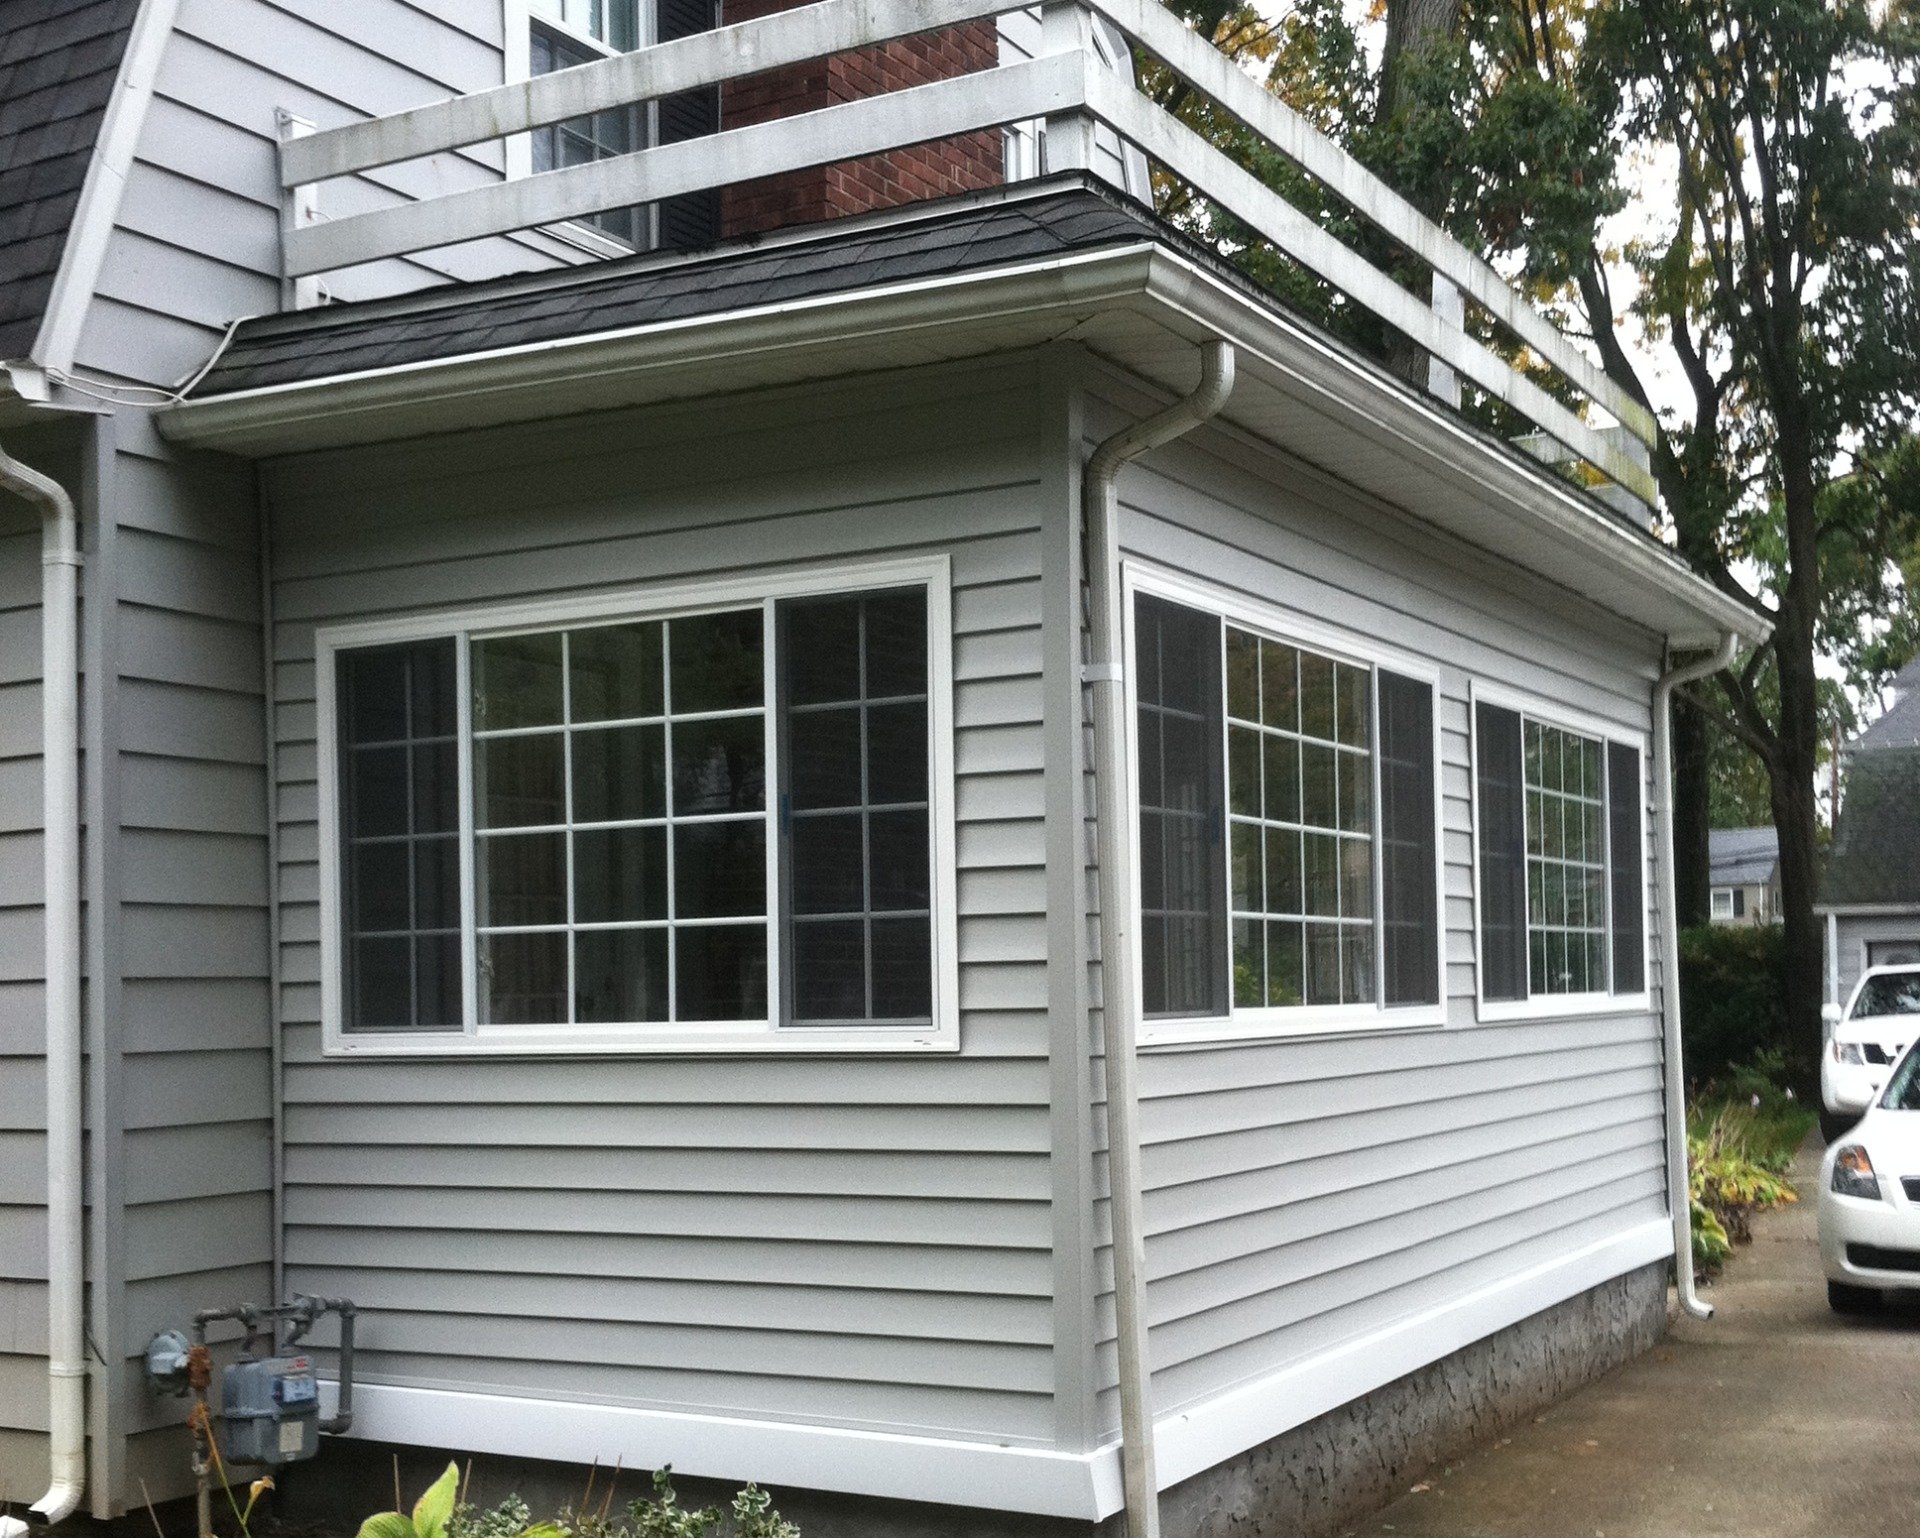 What are the Benefits of Vinyl Siding for Your Home?